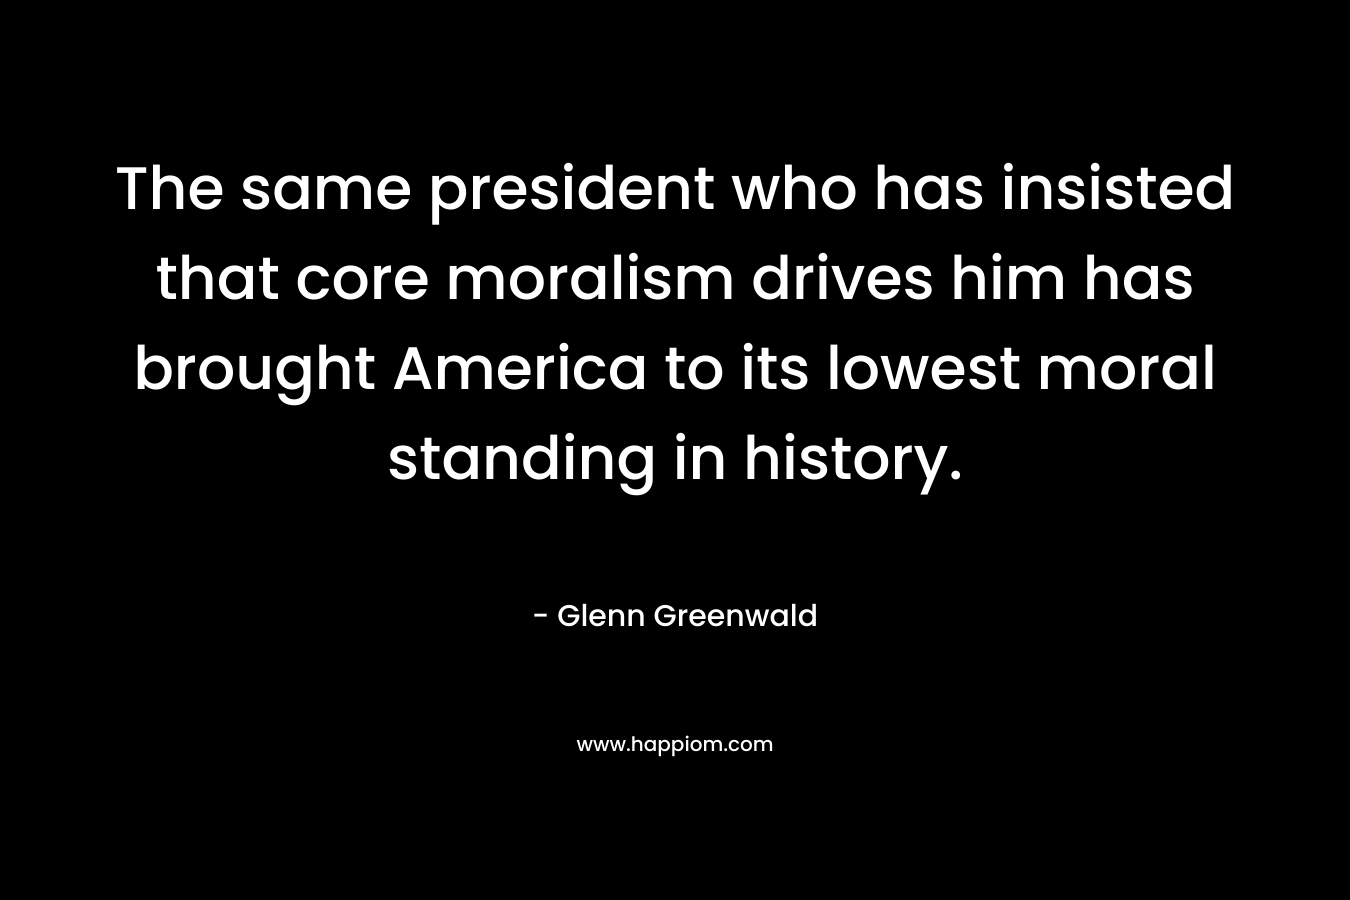 The same president who has insisted that core moralism drives him has brought America to its lowest moral standing in history. – Glenn Greenwald